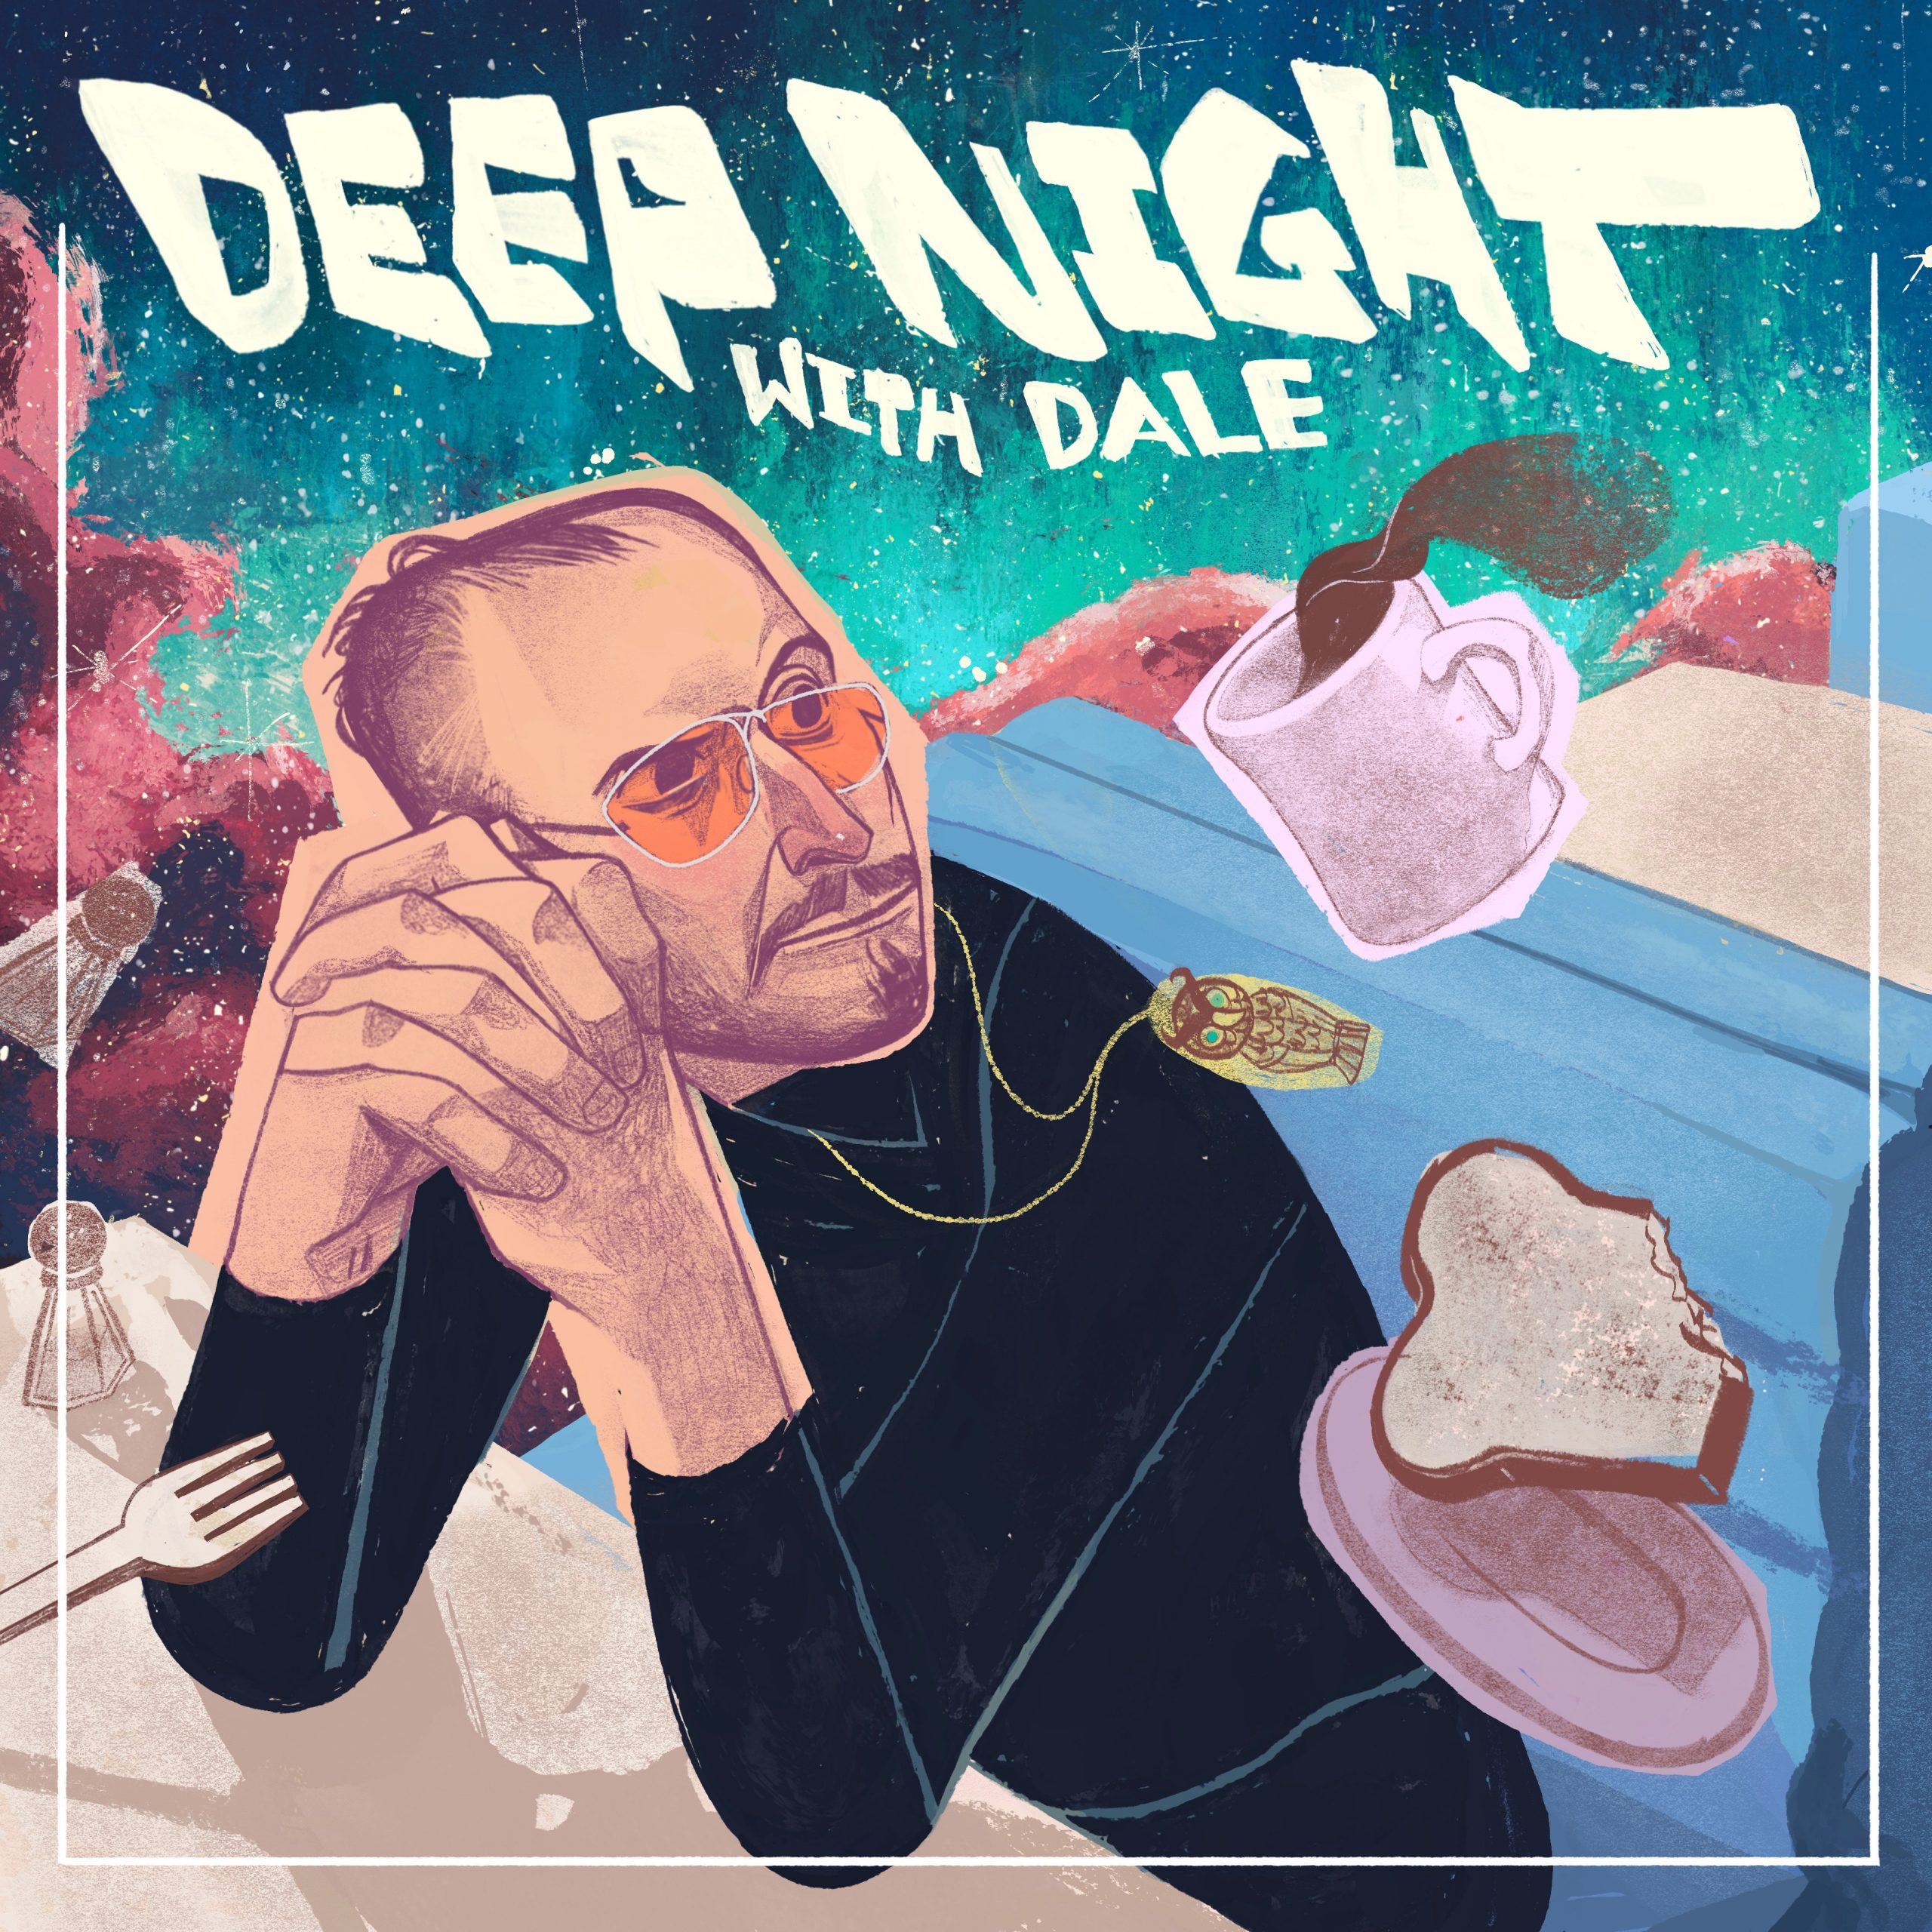 Deep Night with Dale